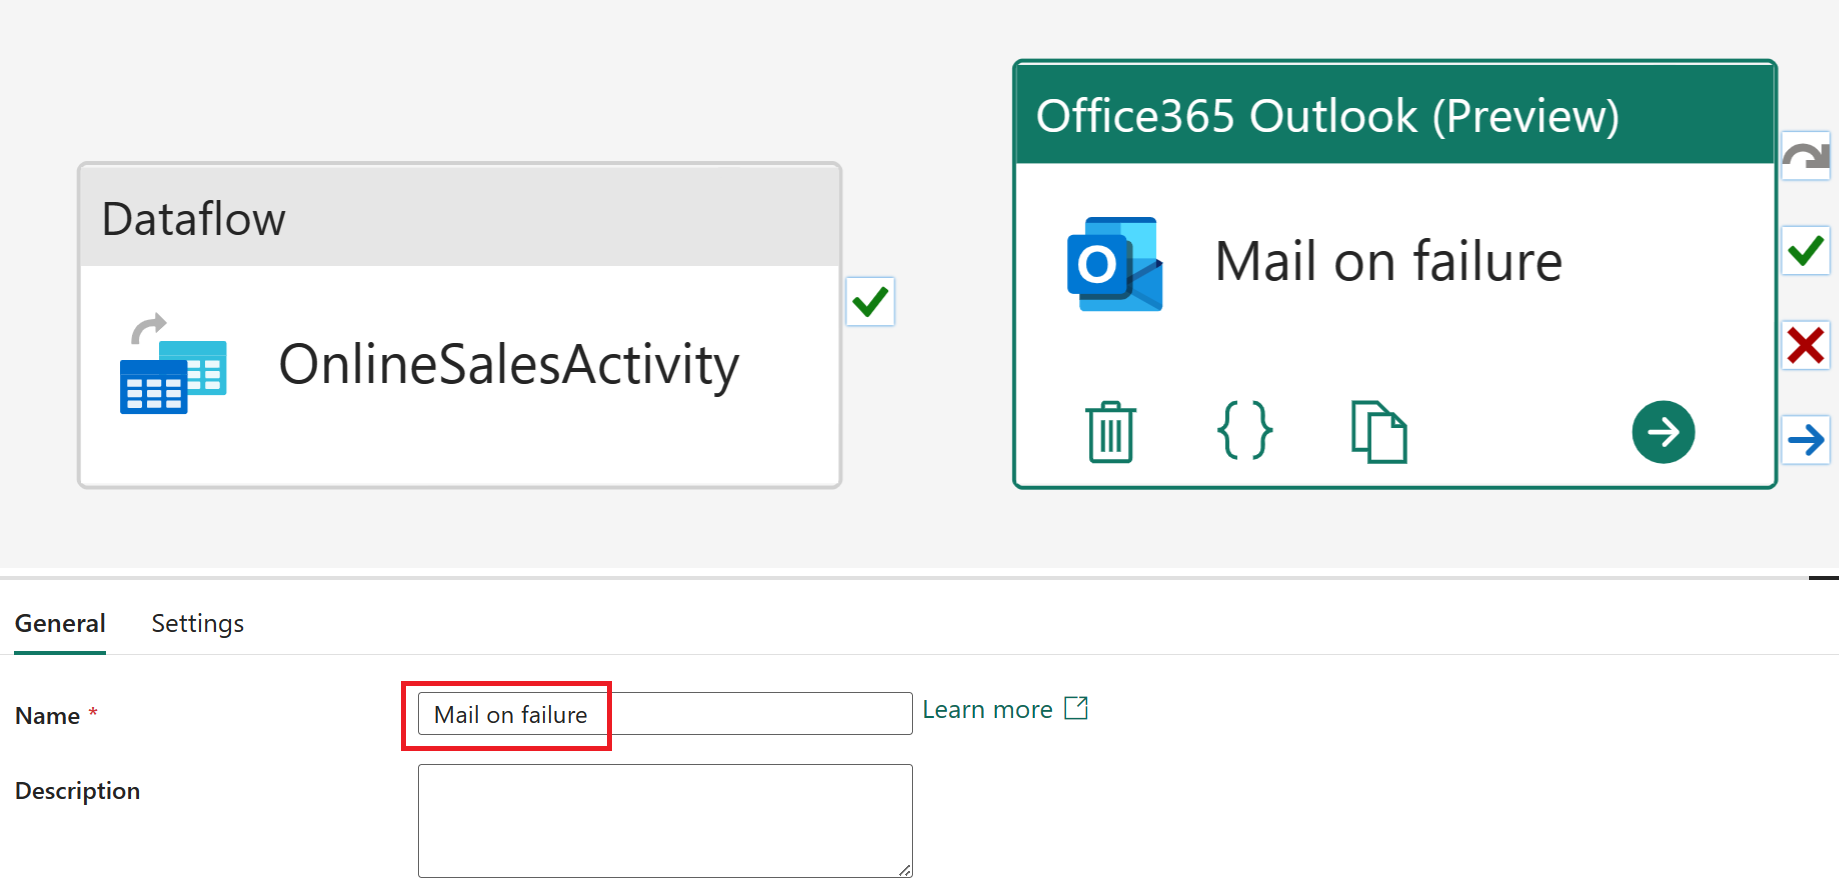 Screenshot of the Office365 Outlook activity name.